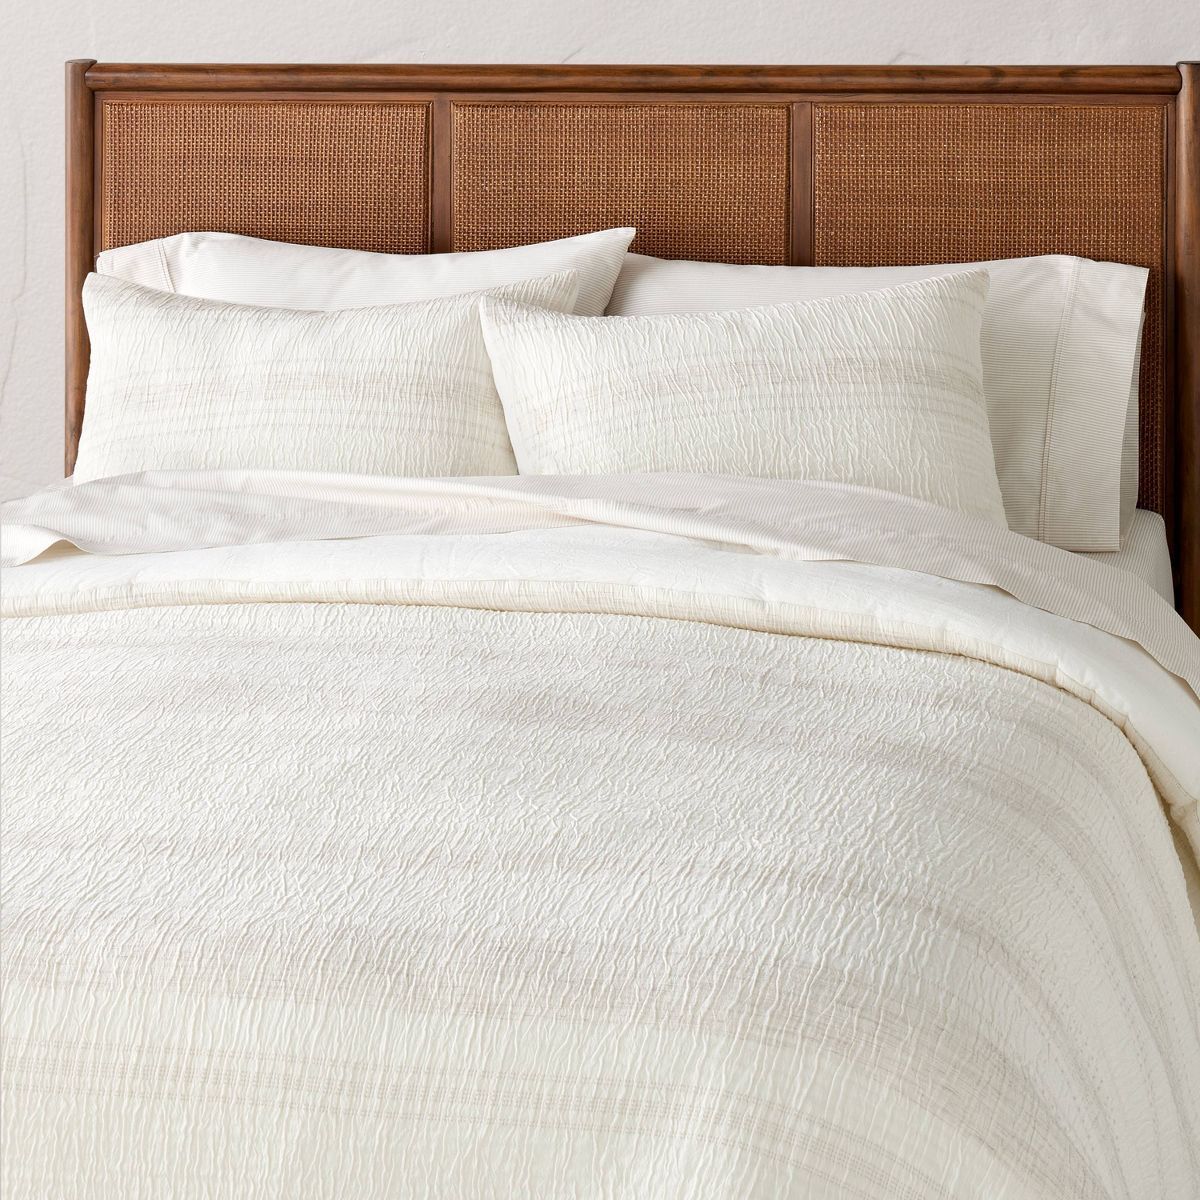 3pc Heather Stripe Comforter Bedding Set Twilight Taupe - Hearth & Hand™ with Magnolia | Target